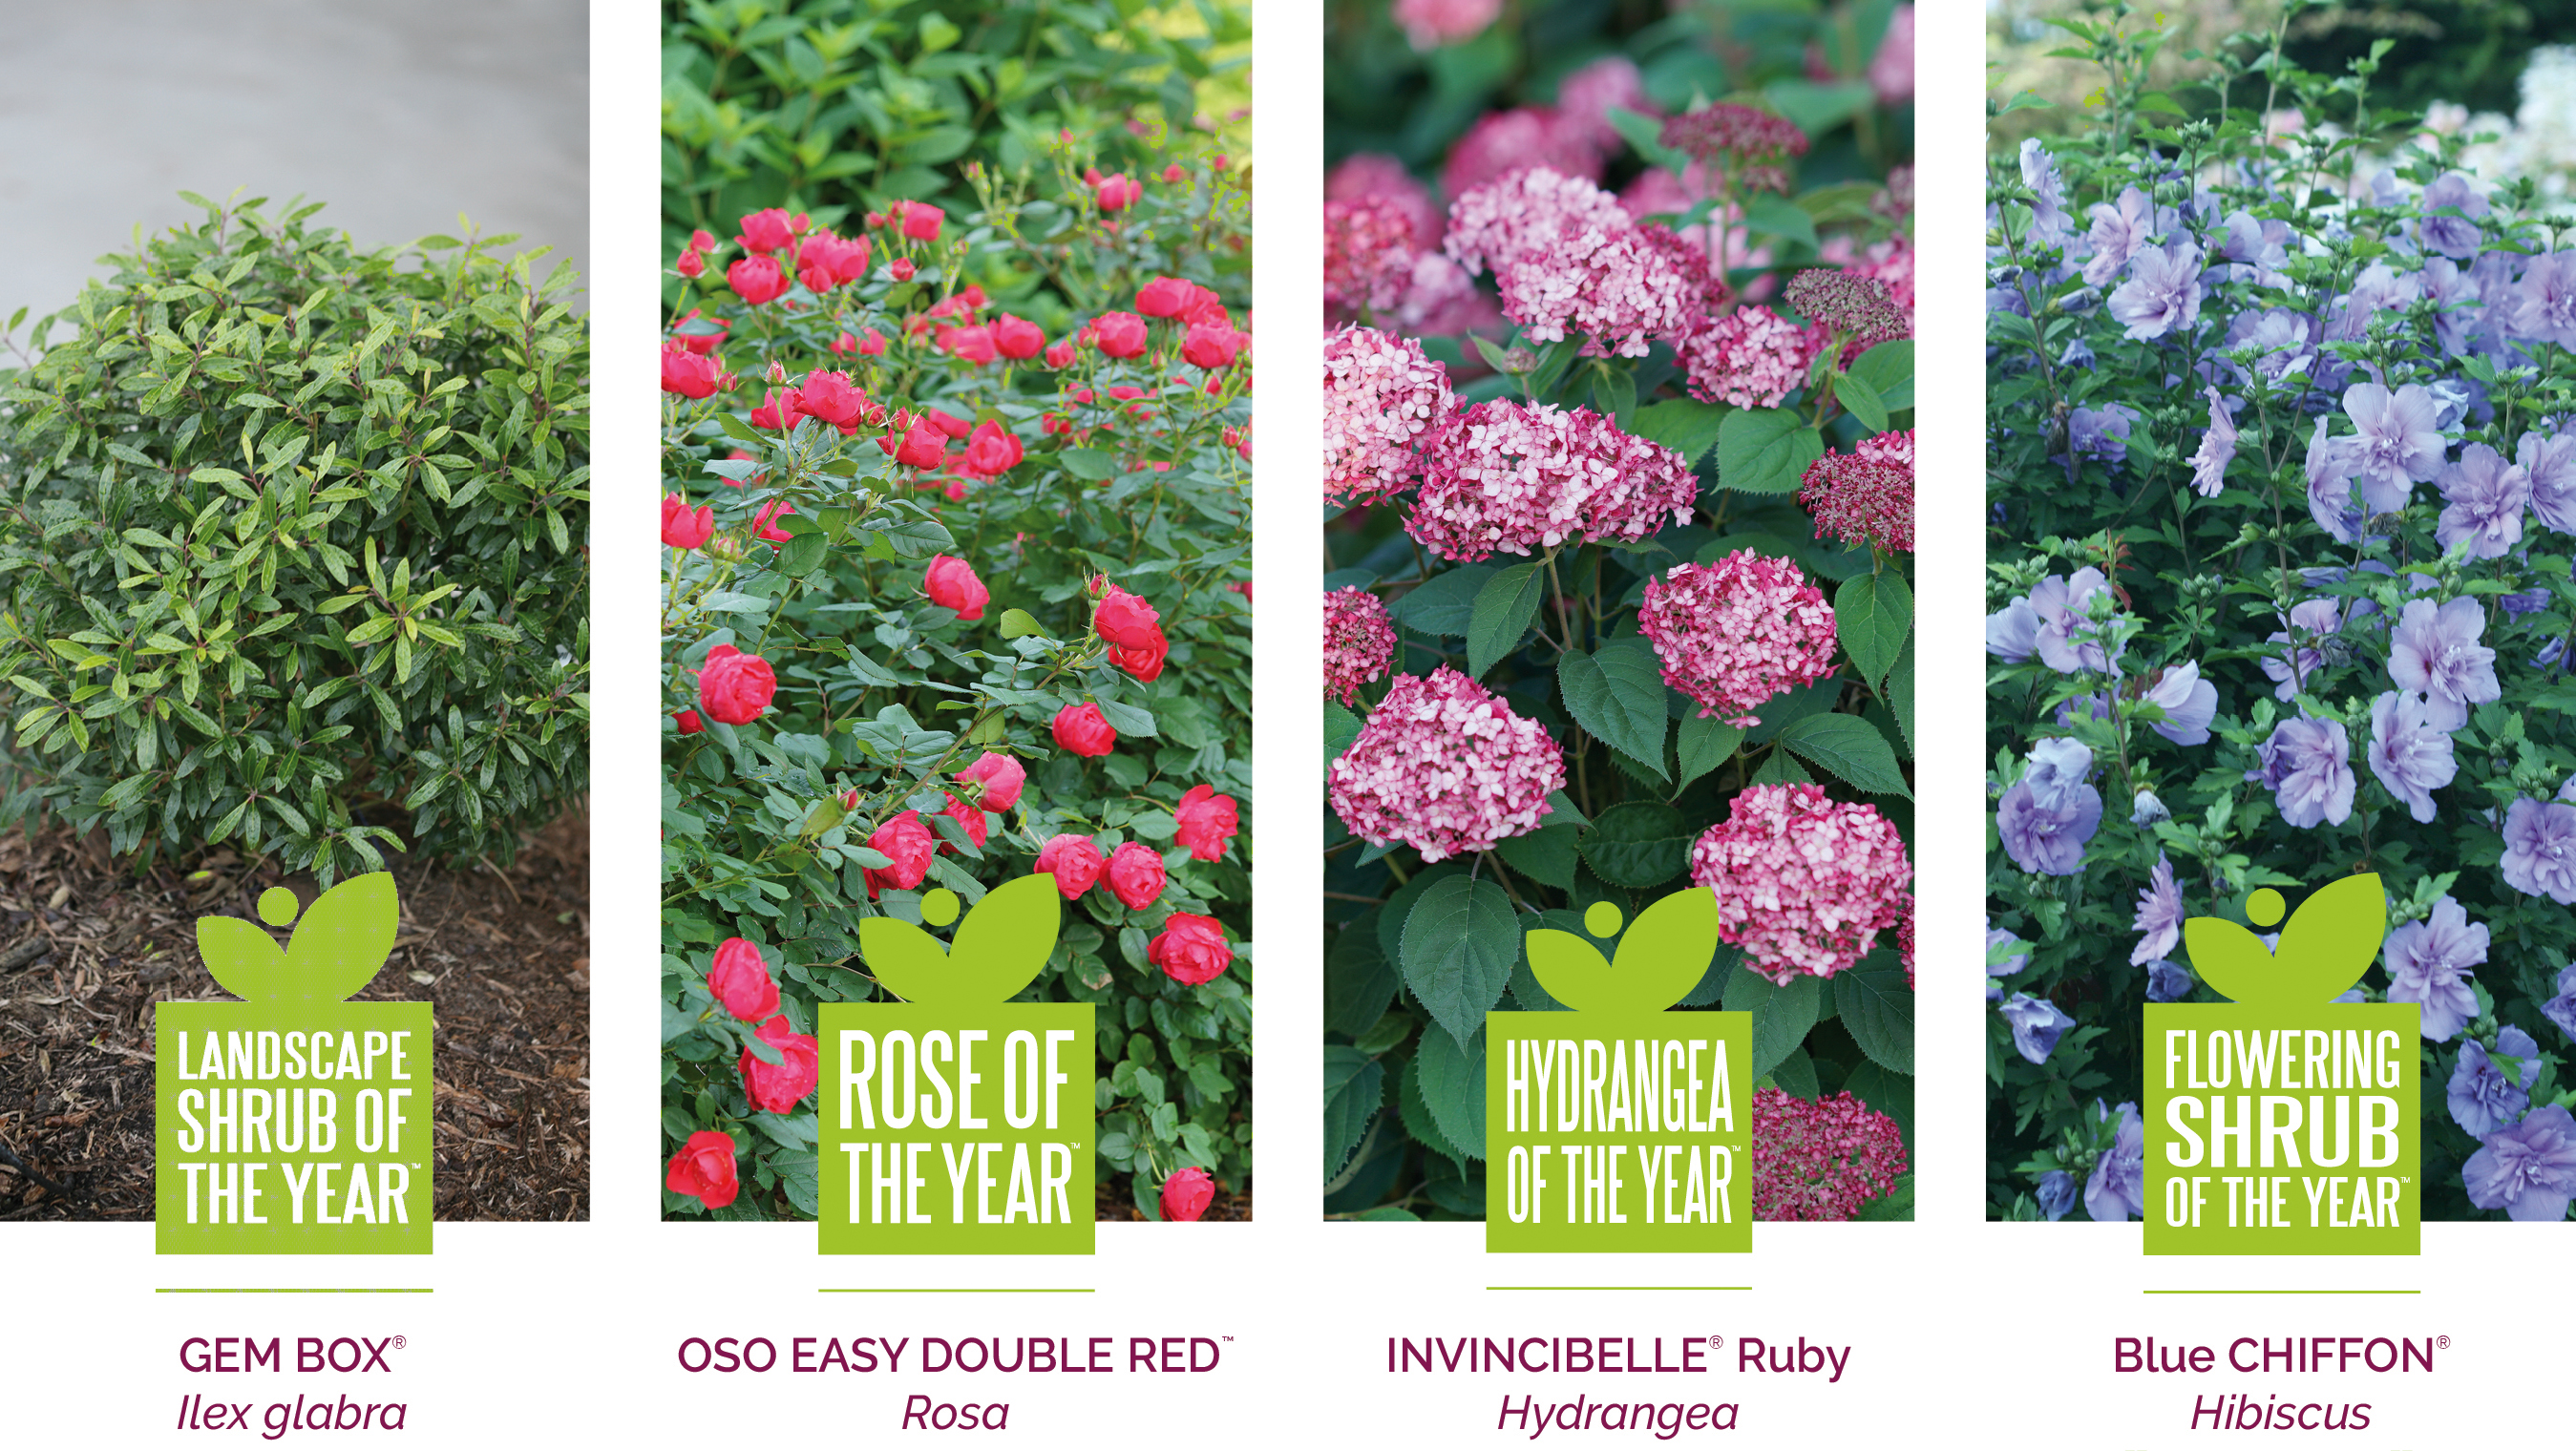 Preview of 2020 Shrubs of the Year Grower’s Guide PDF